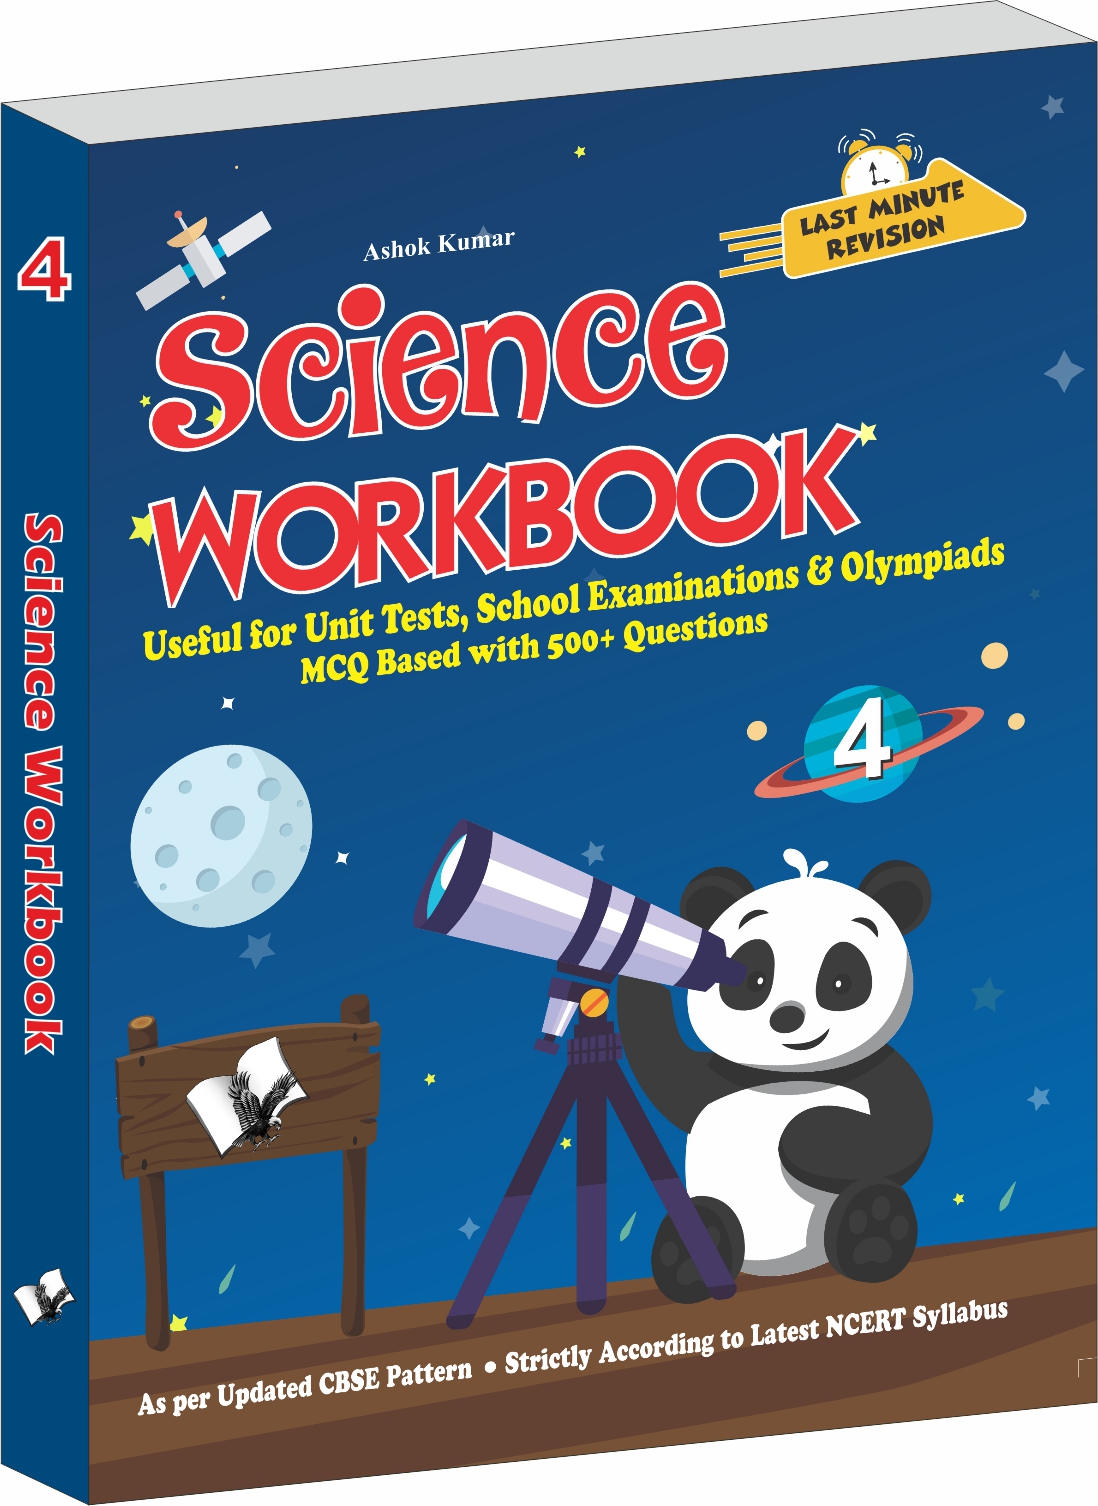 Science Workbook Class 4-Useful for Unit Tests, School Examinations & Olympiads